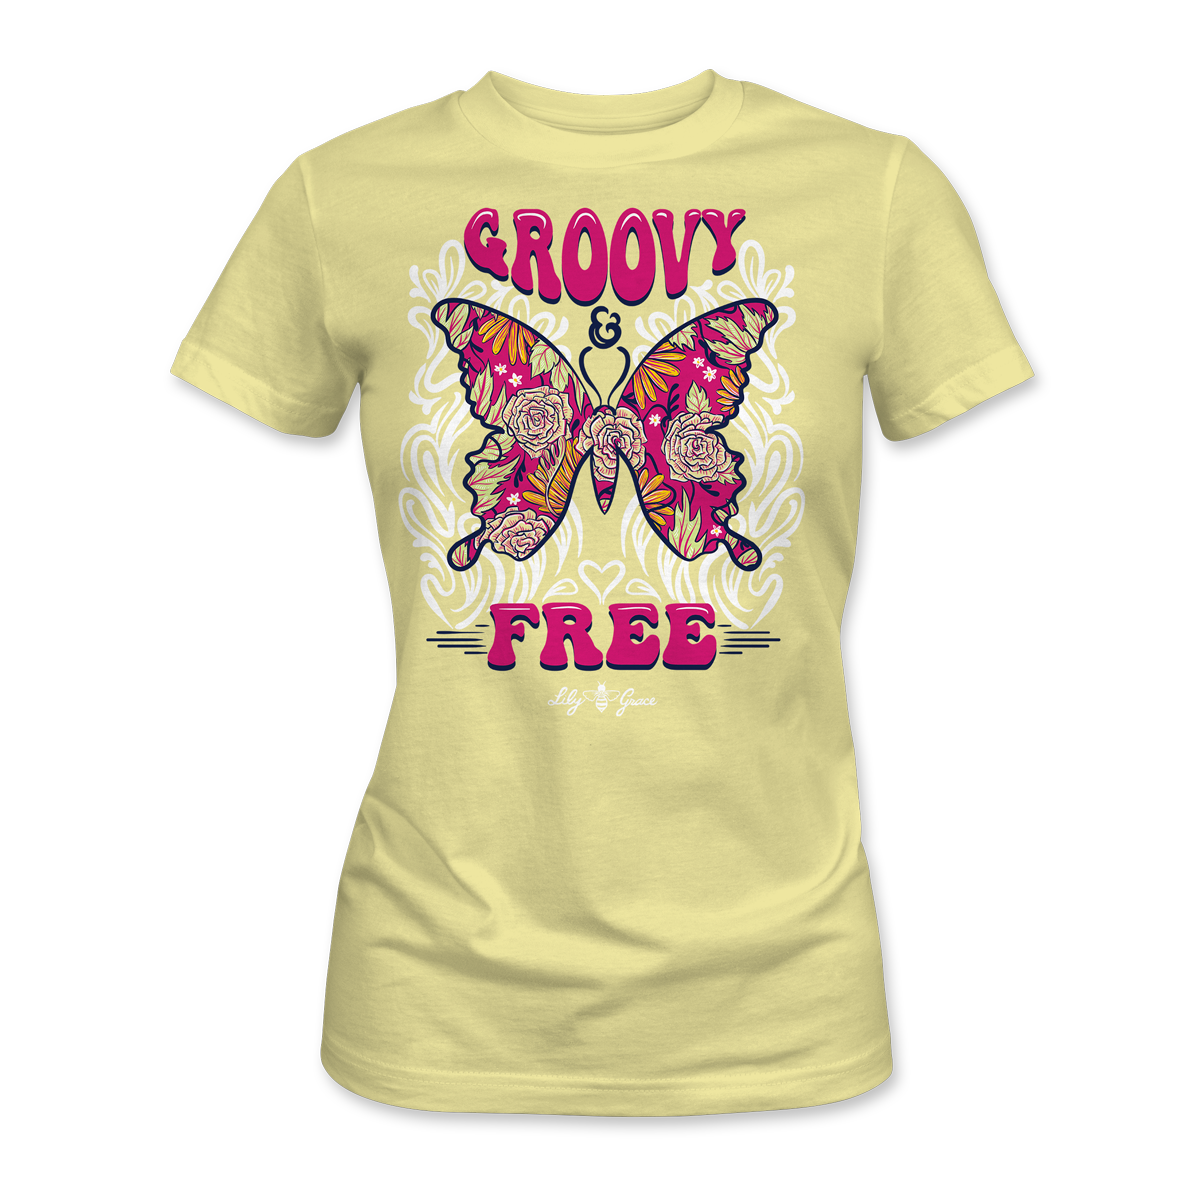 Groovy and Free - Yellow - FRONT PRINT